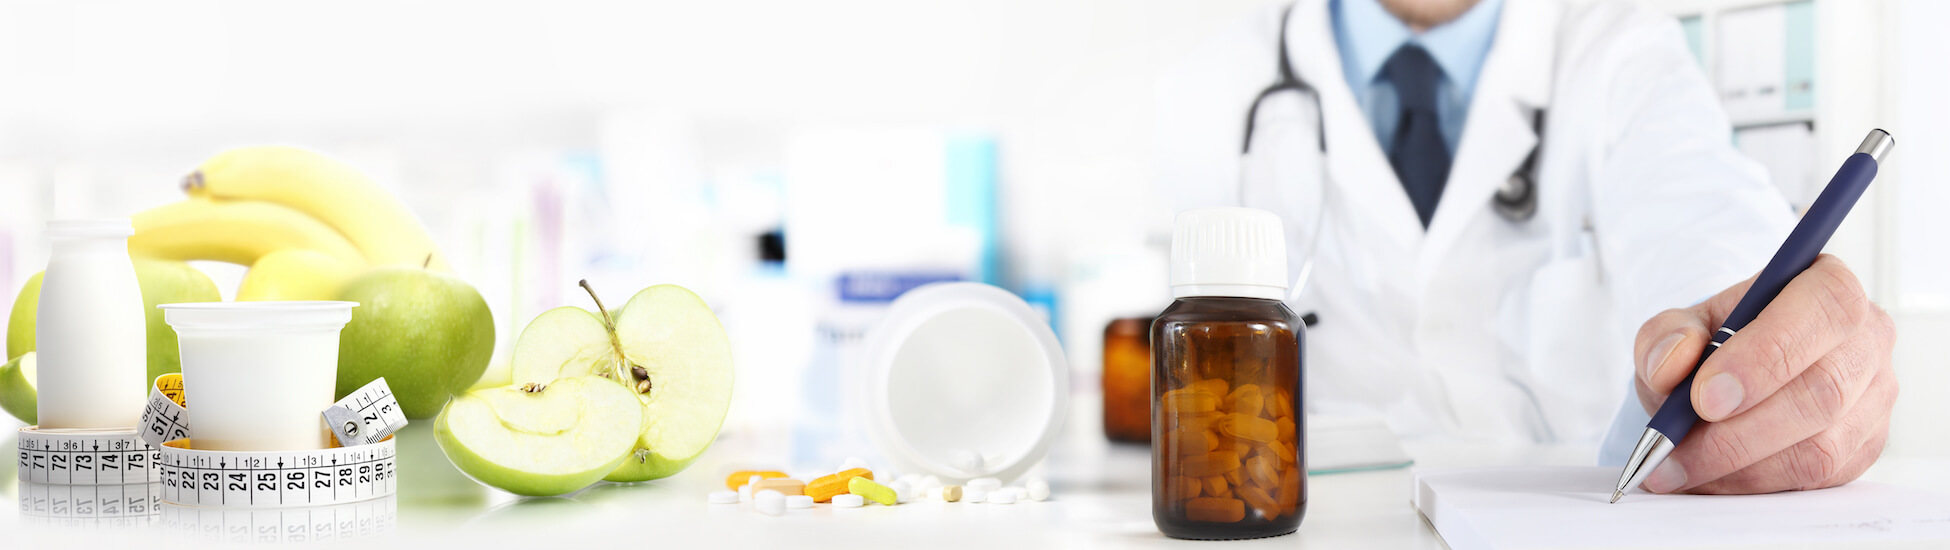 Apotheco Holistic Approach Blog - Table in pharmacy with pills and apples